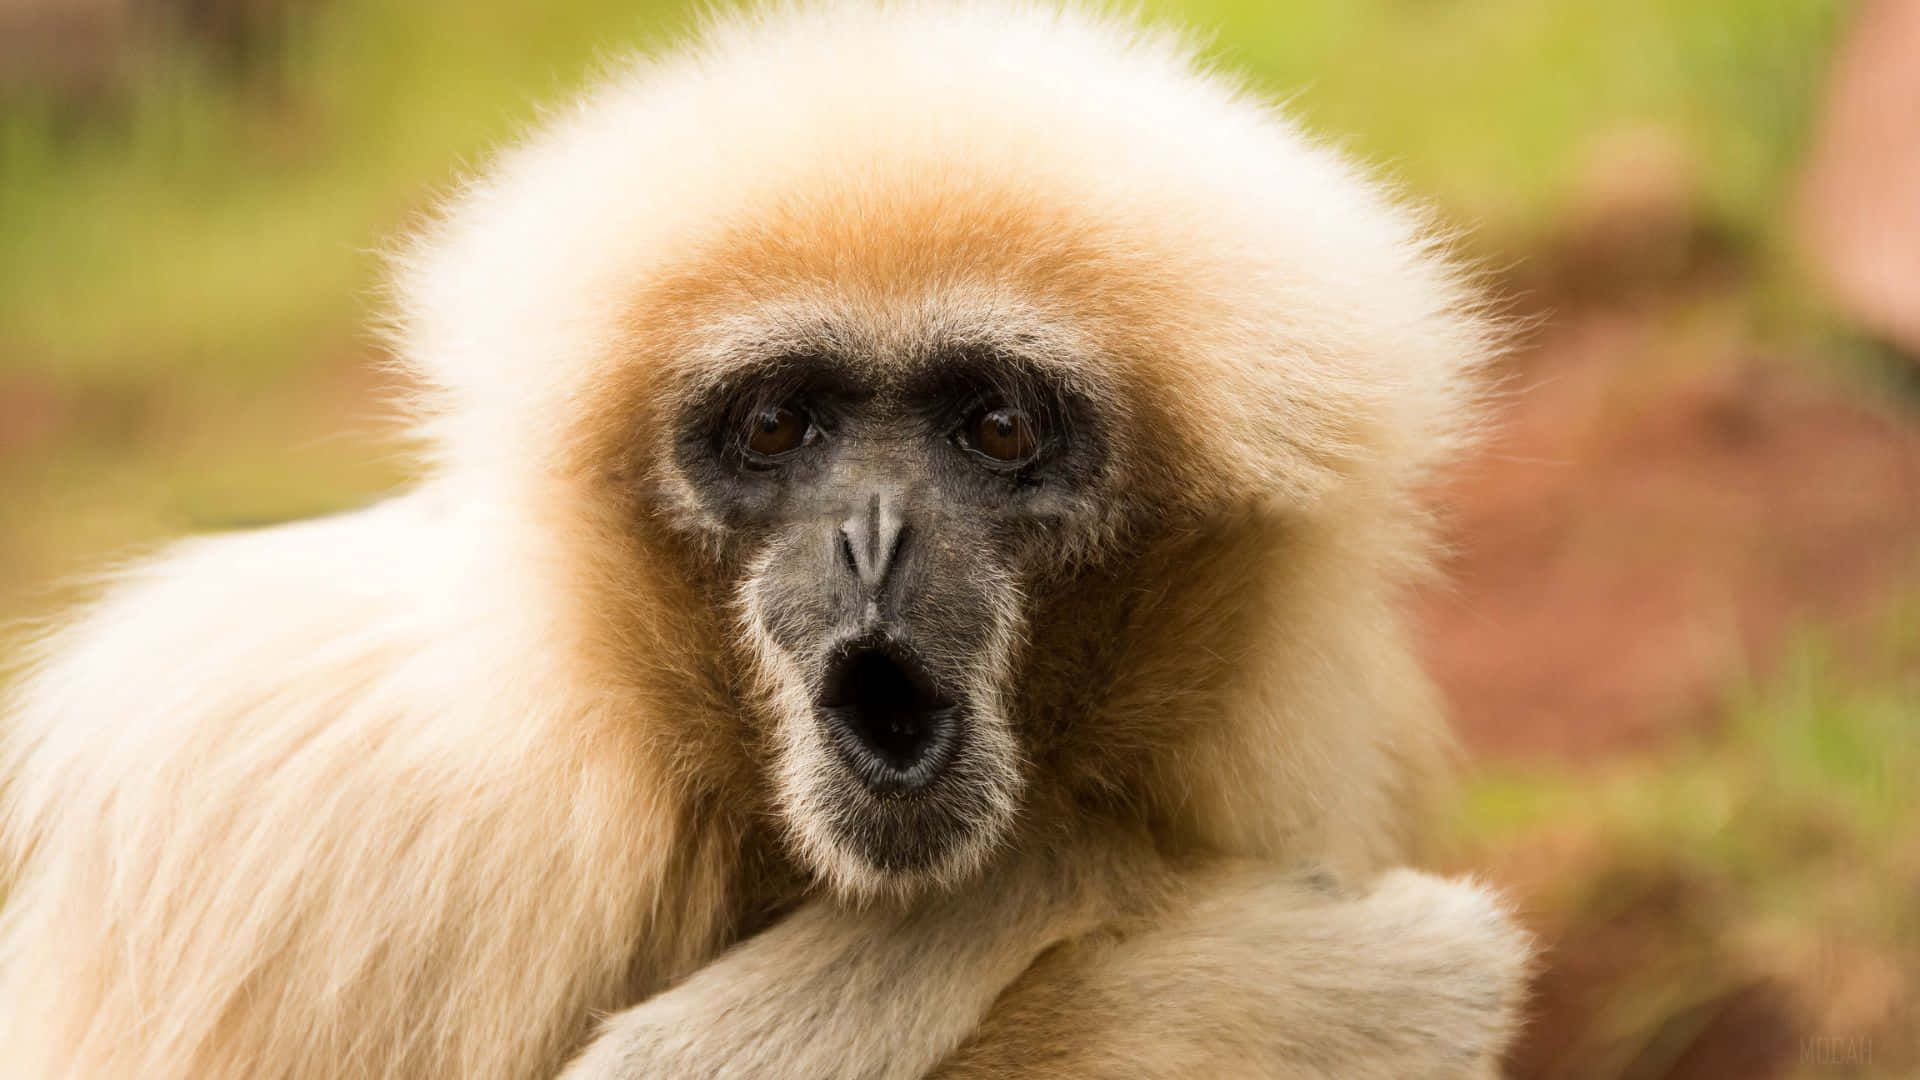 A close-up of a Gibbon on a 1080p background